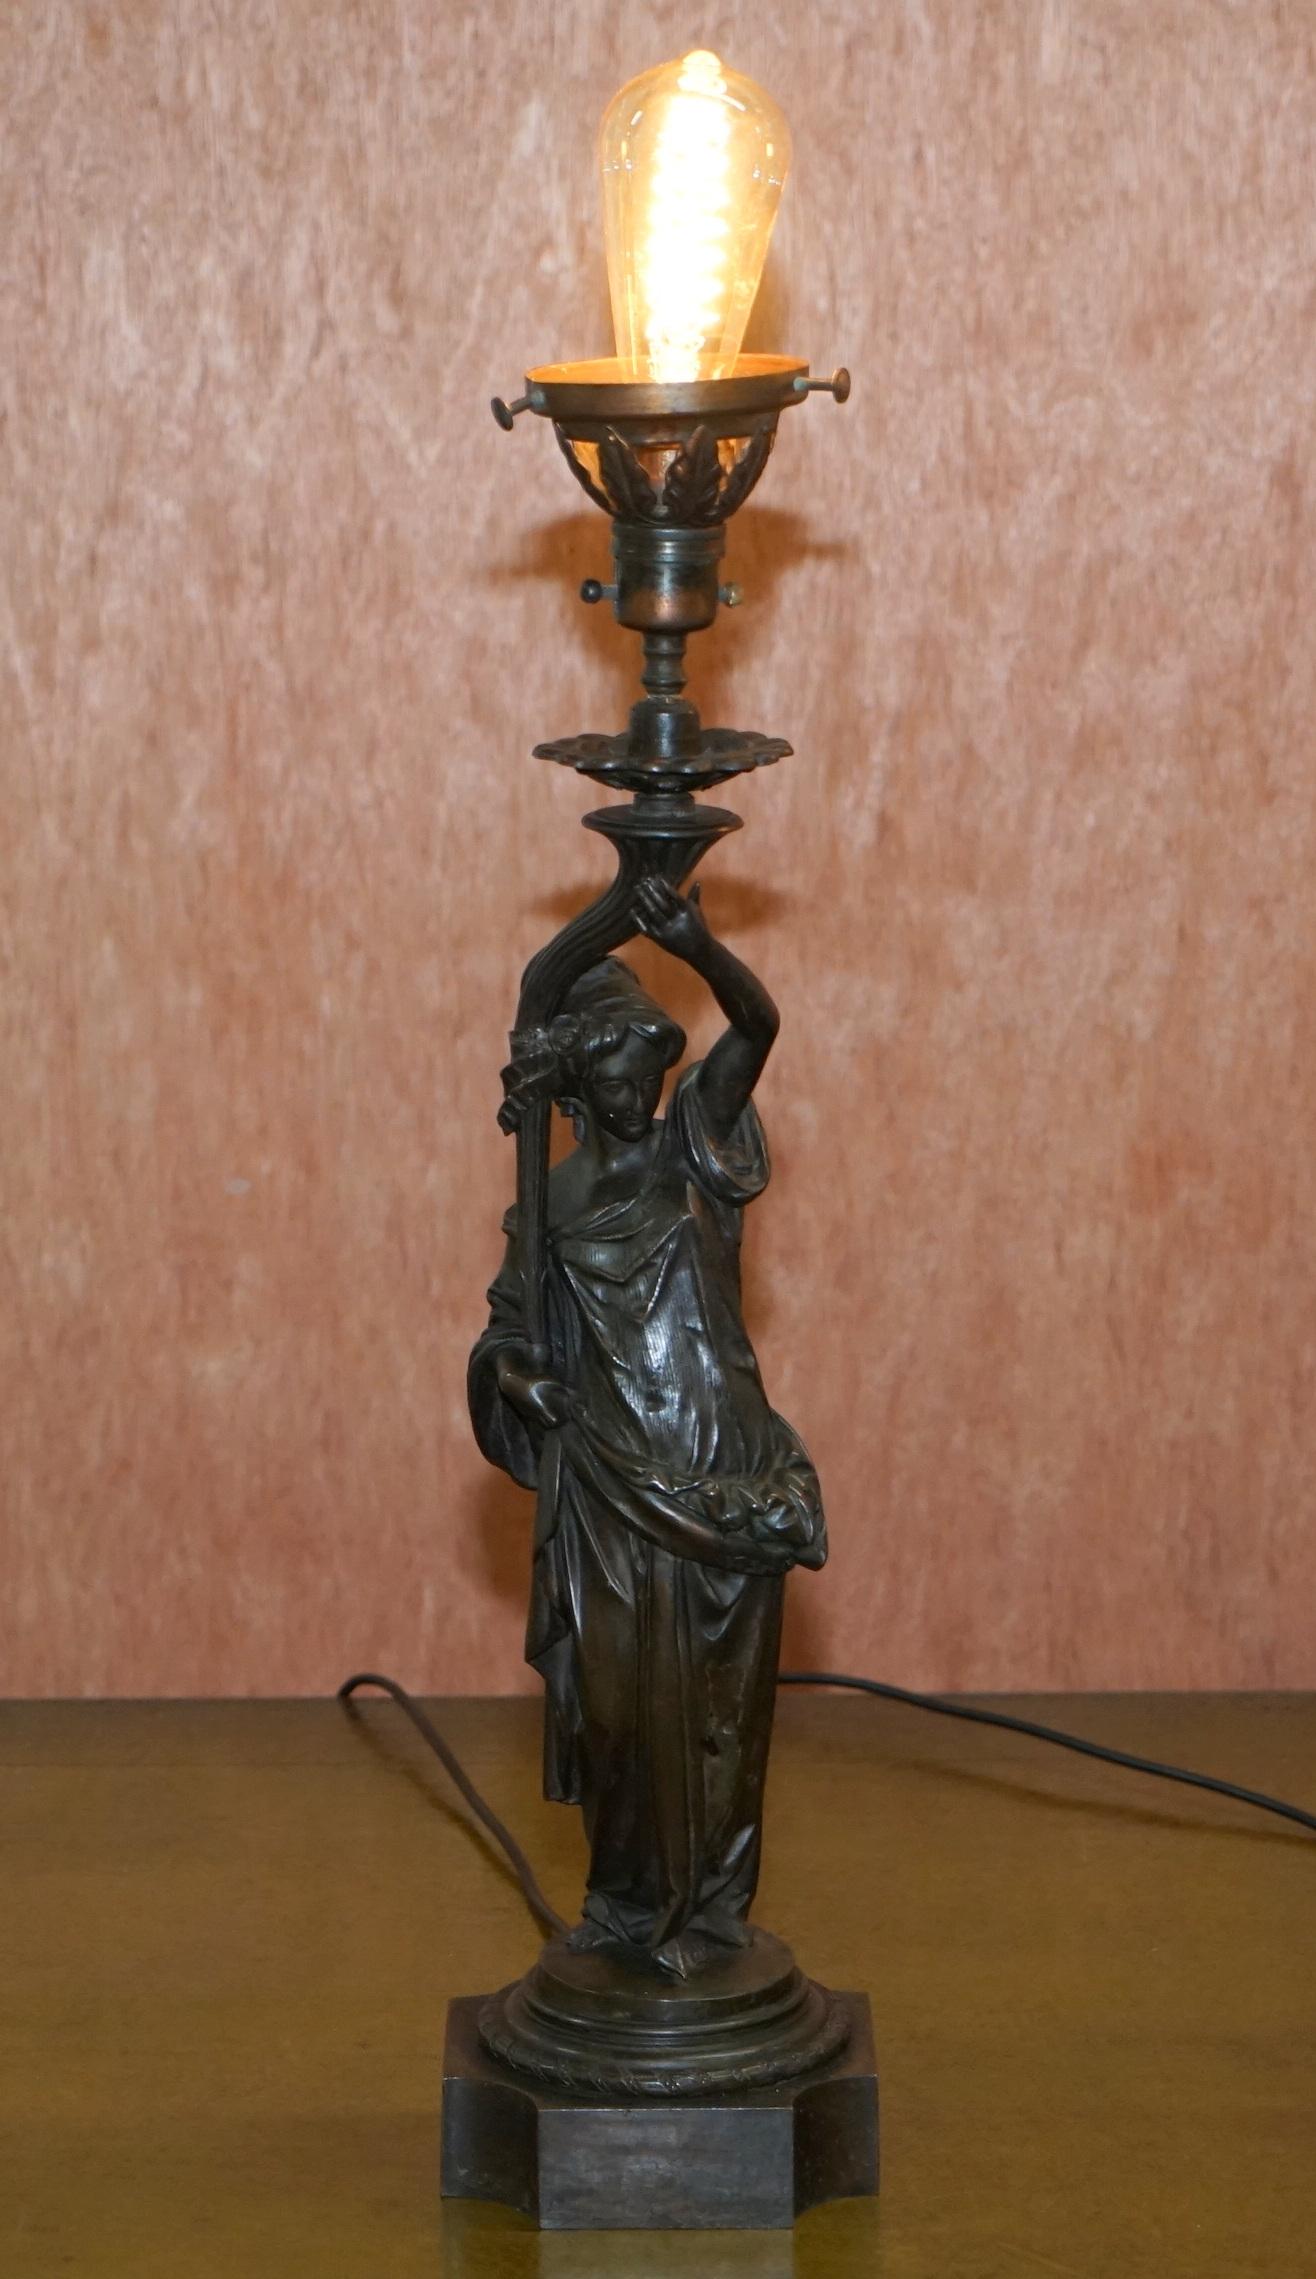 We are delighted to this stunning pair of original French late Victorian Art Nouveau maiden statues rewired as lamps

They are in absolutely stunning condition, fully serviced with new cabling throughout, they are ready to go, they take a normal